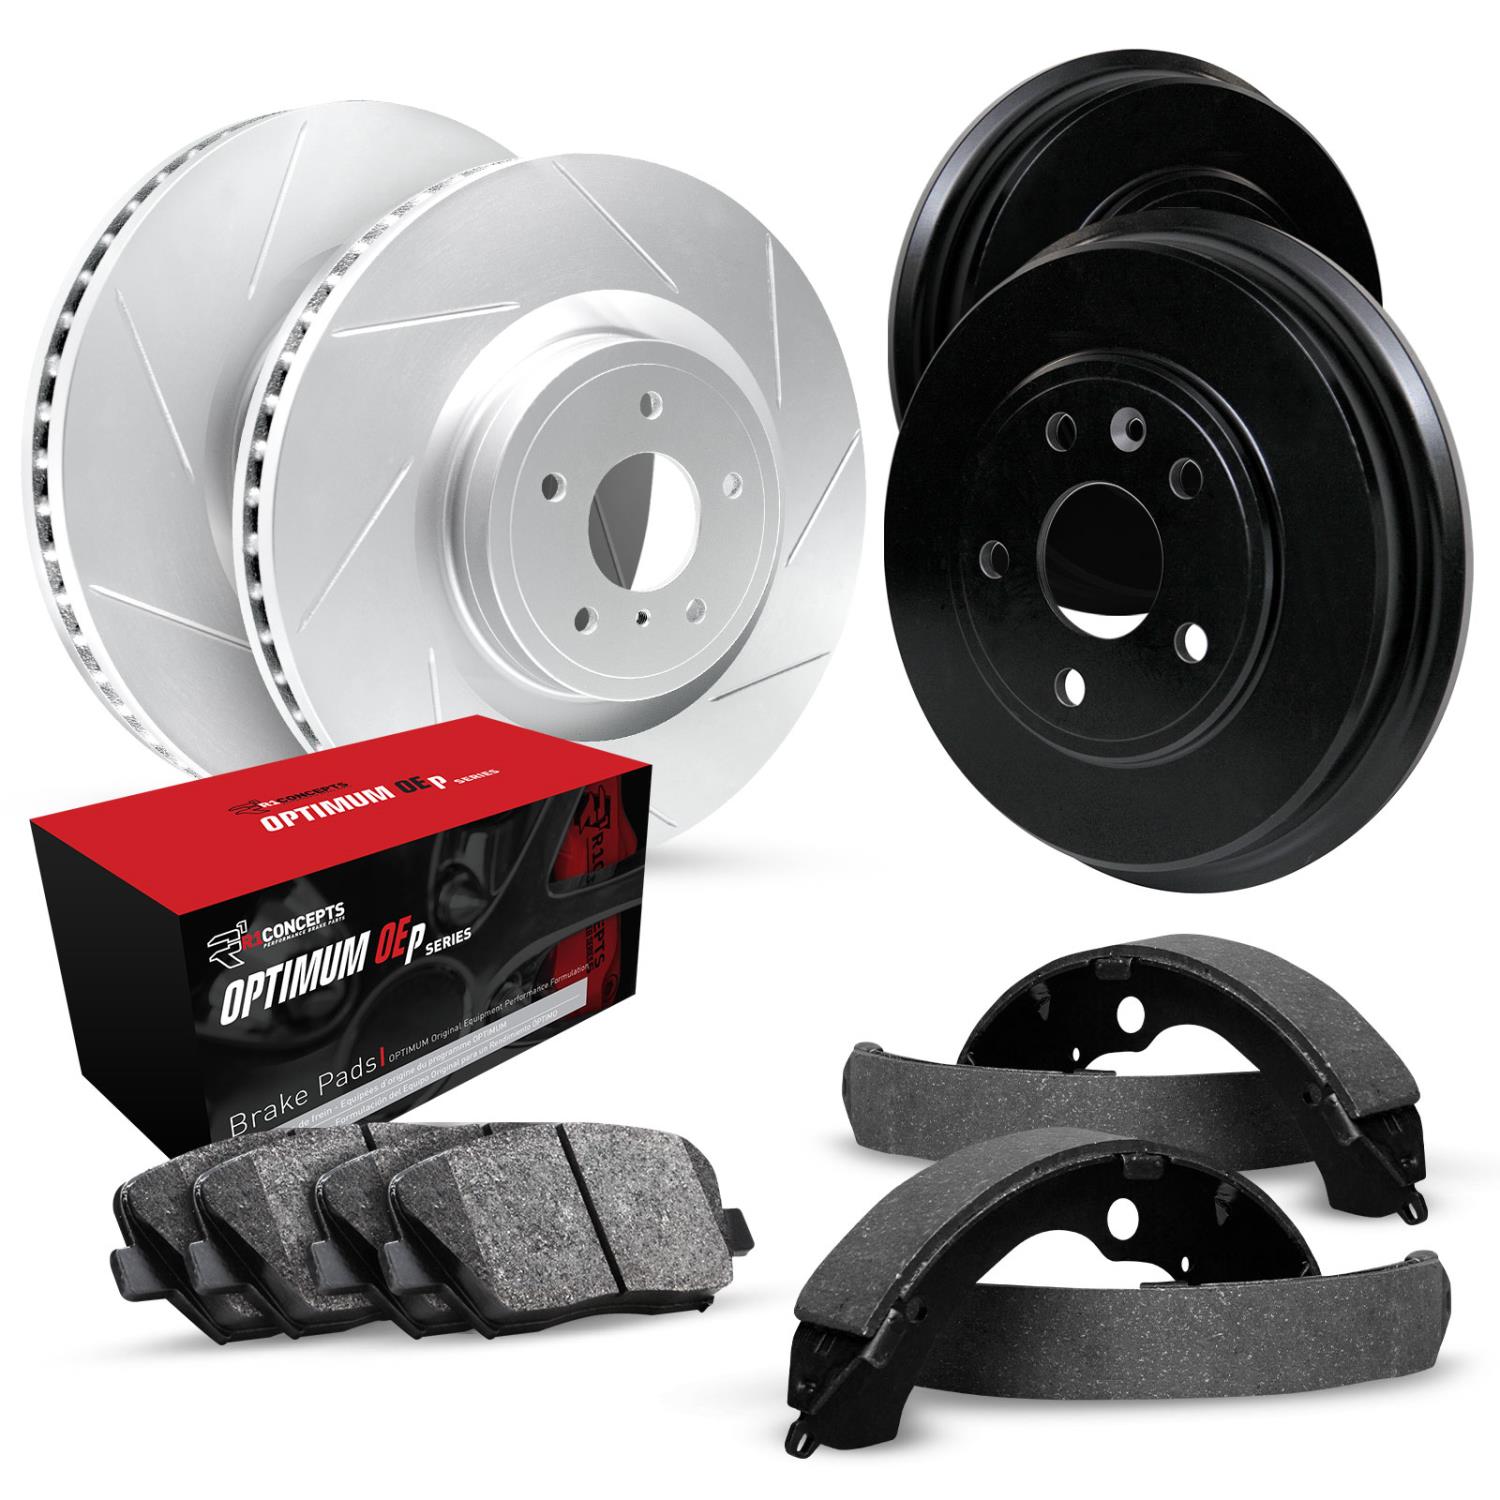 GEO-Carbon Slotted Brake Rotor & Drum Set w/Optimum OE Pads & Shoes, 1978-1993 GM, Position: Front & Rear